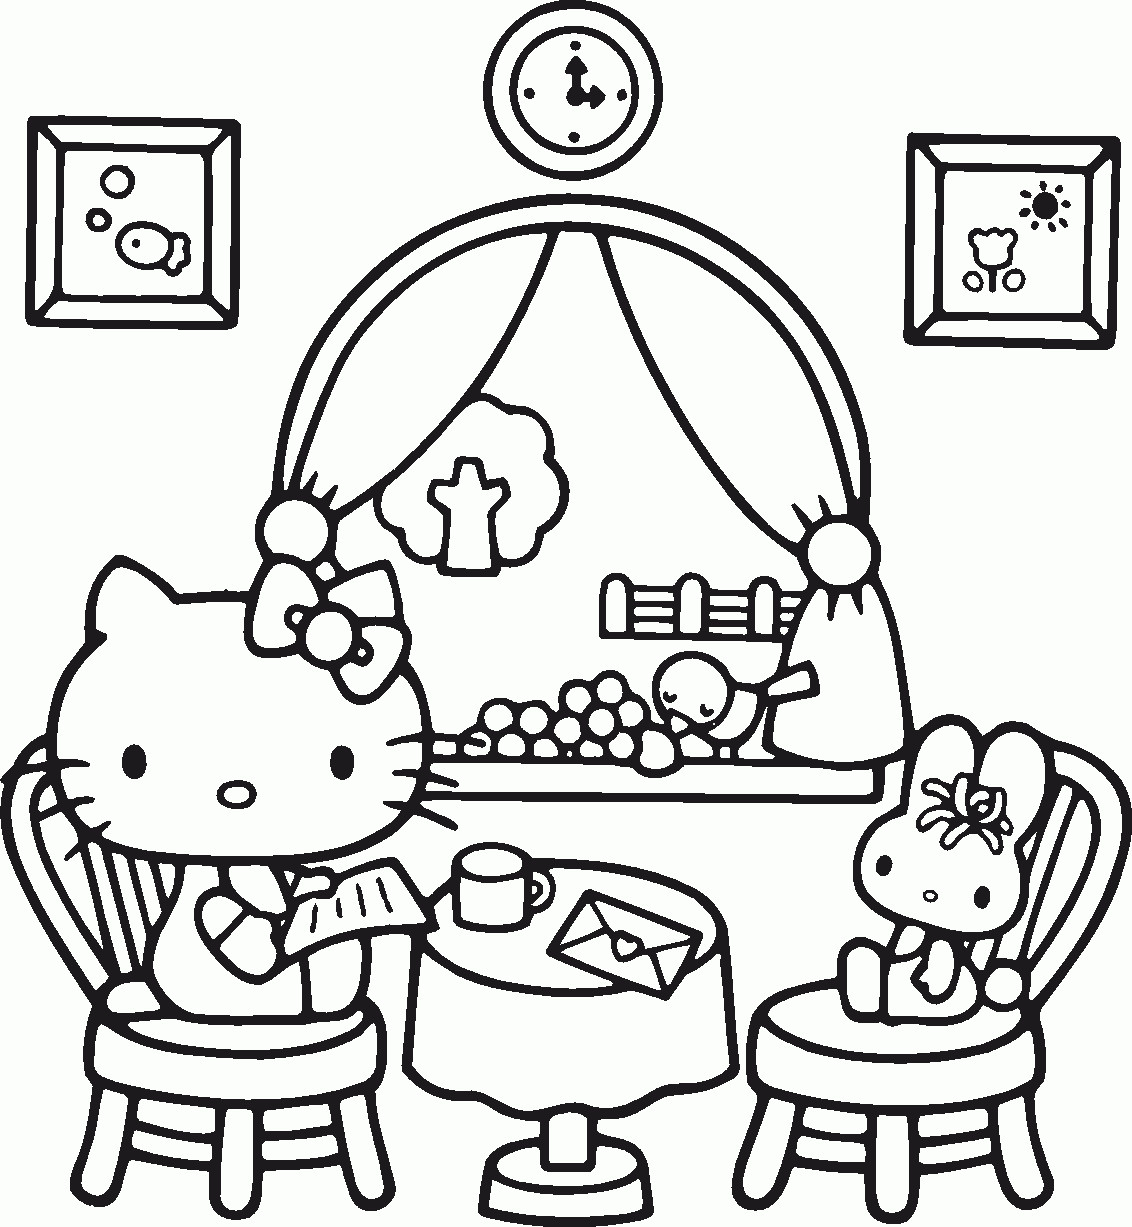 Free Coloring Sheets For Preschool
 Free Colouring Pages For Kindergarten Go To School 1